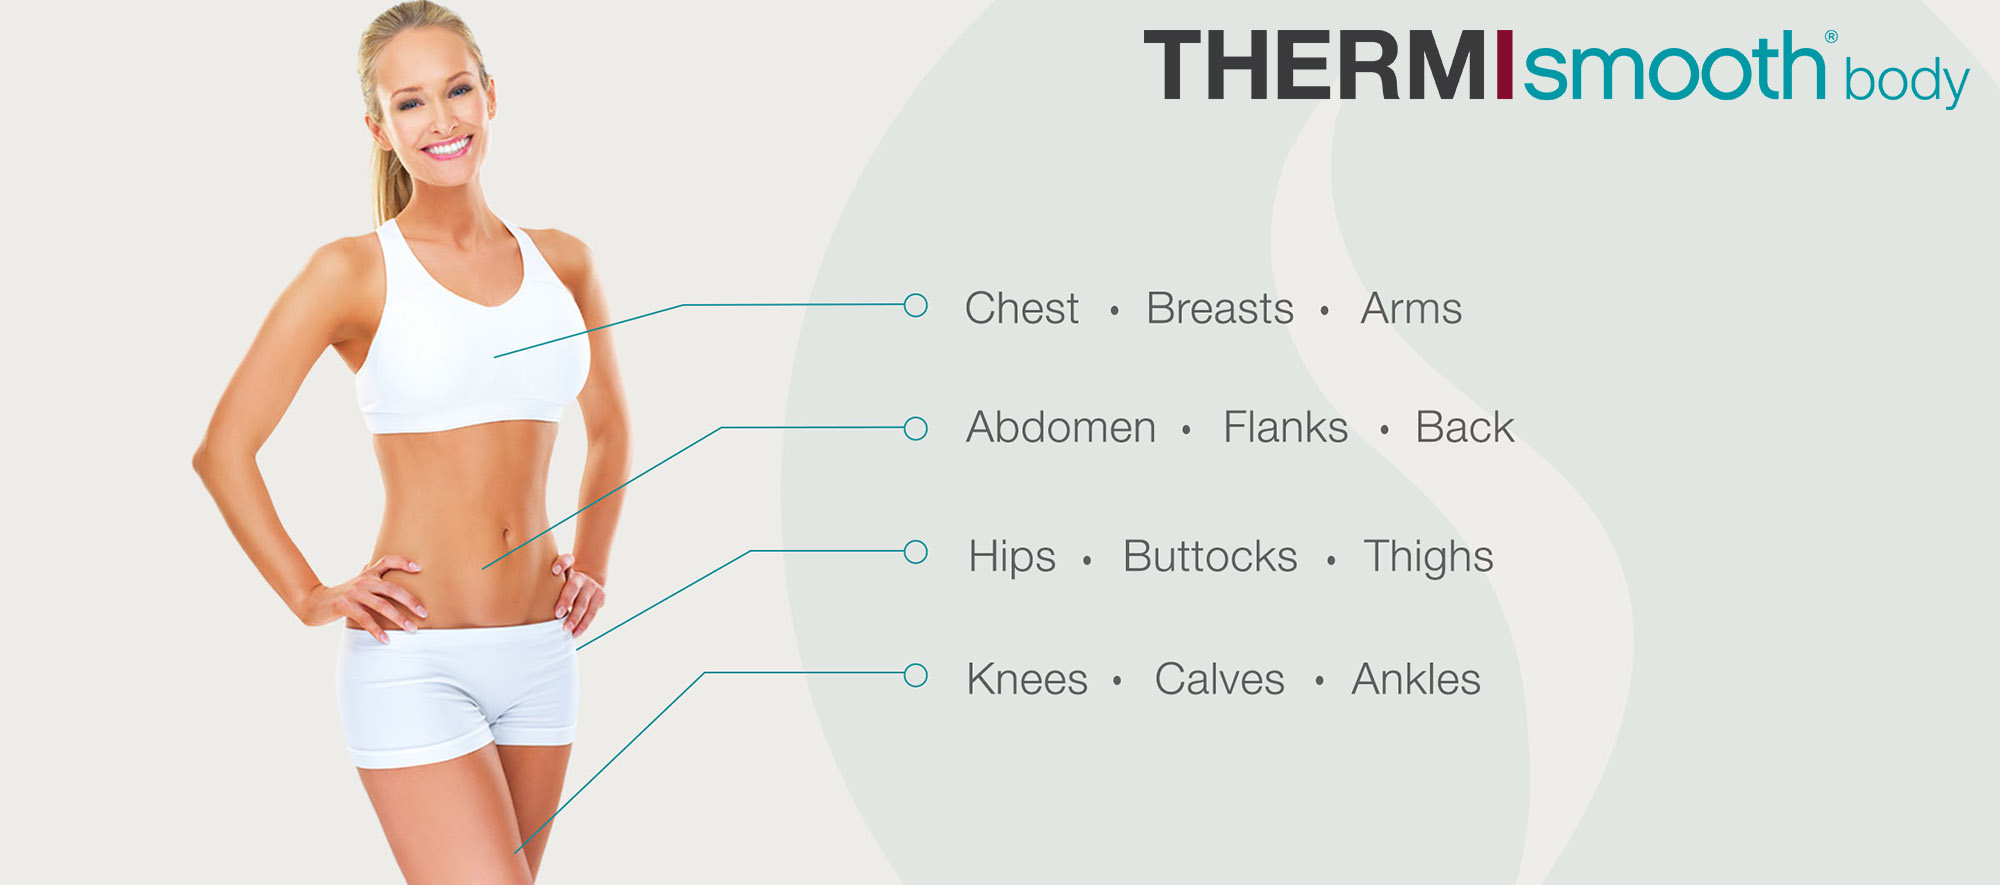 ThermiSmooth-Body-with-areas